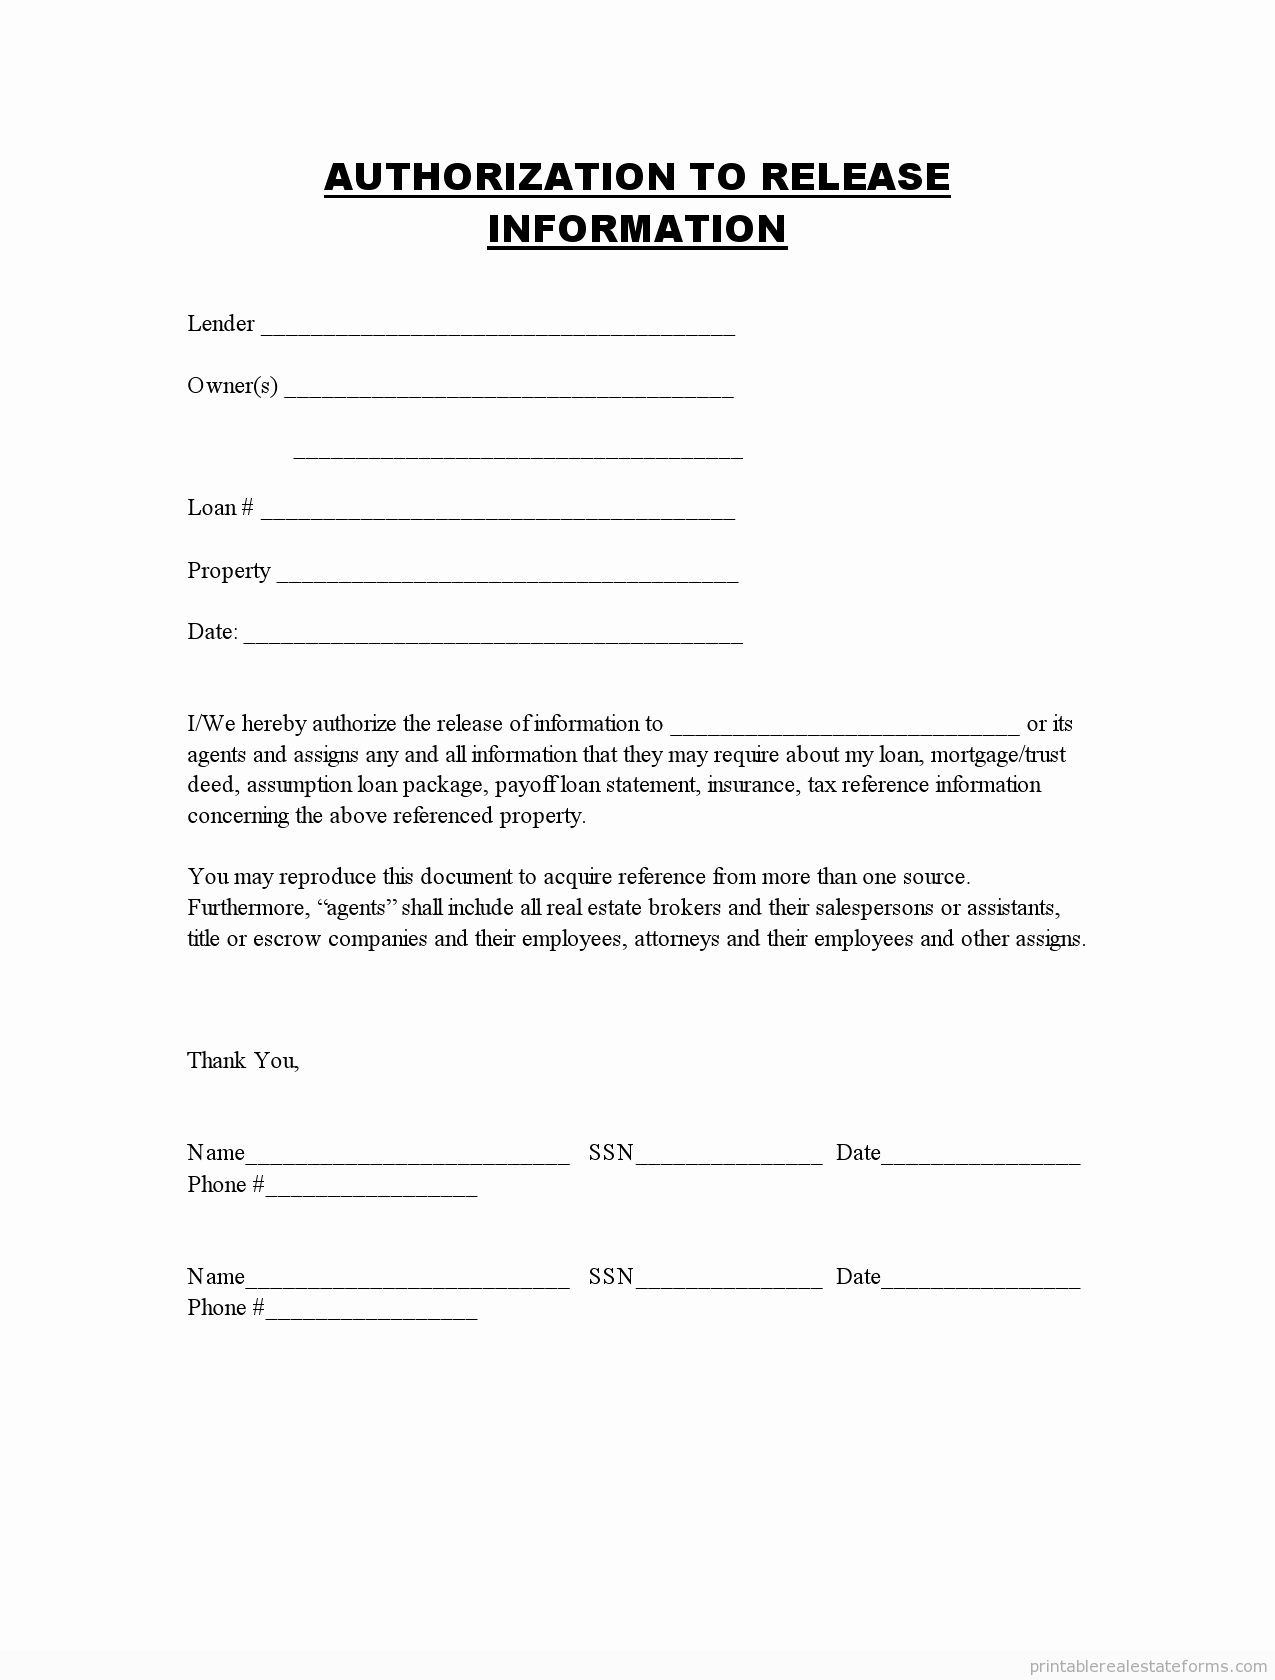 Release Of Information forms Template Inspirational Release Information forms Printable Blank Template